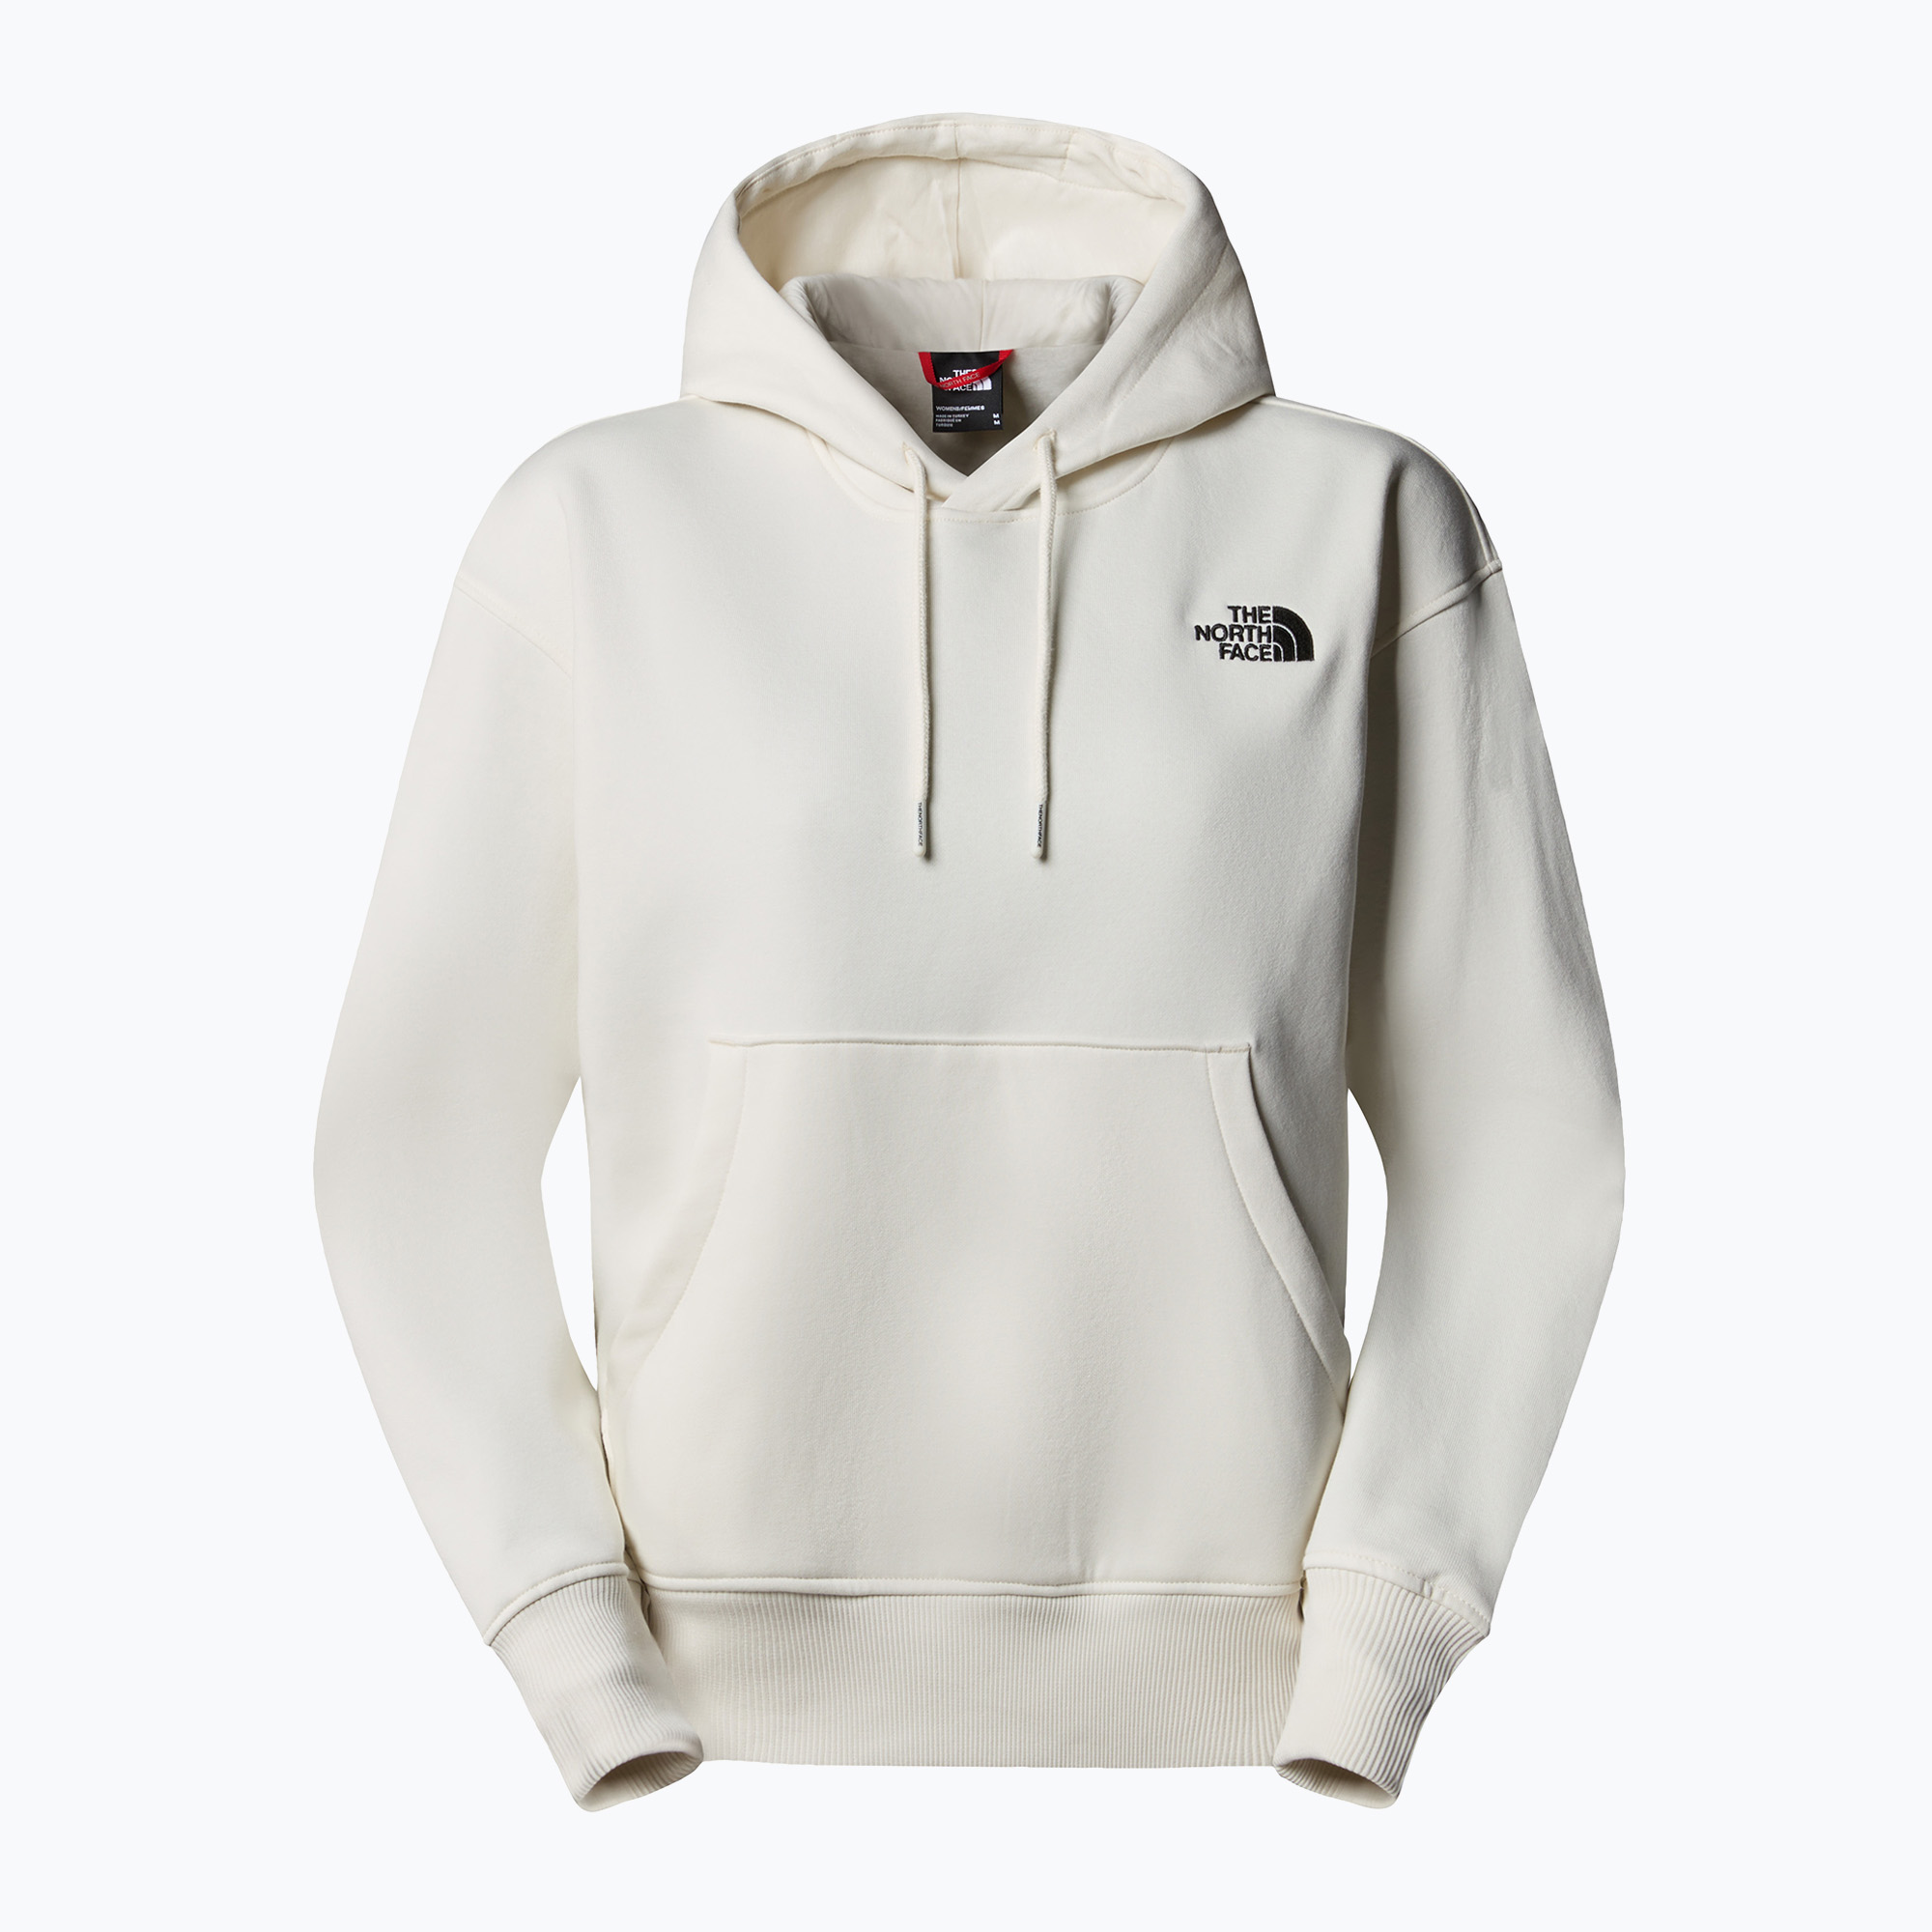 Суитшърт за жени The North Face Essential Hoodie white dune